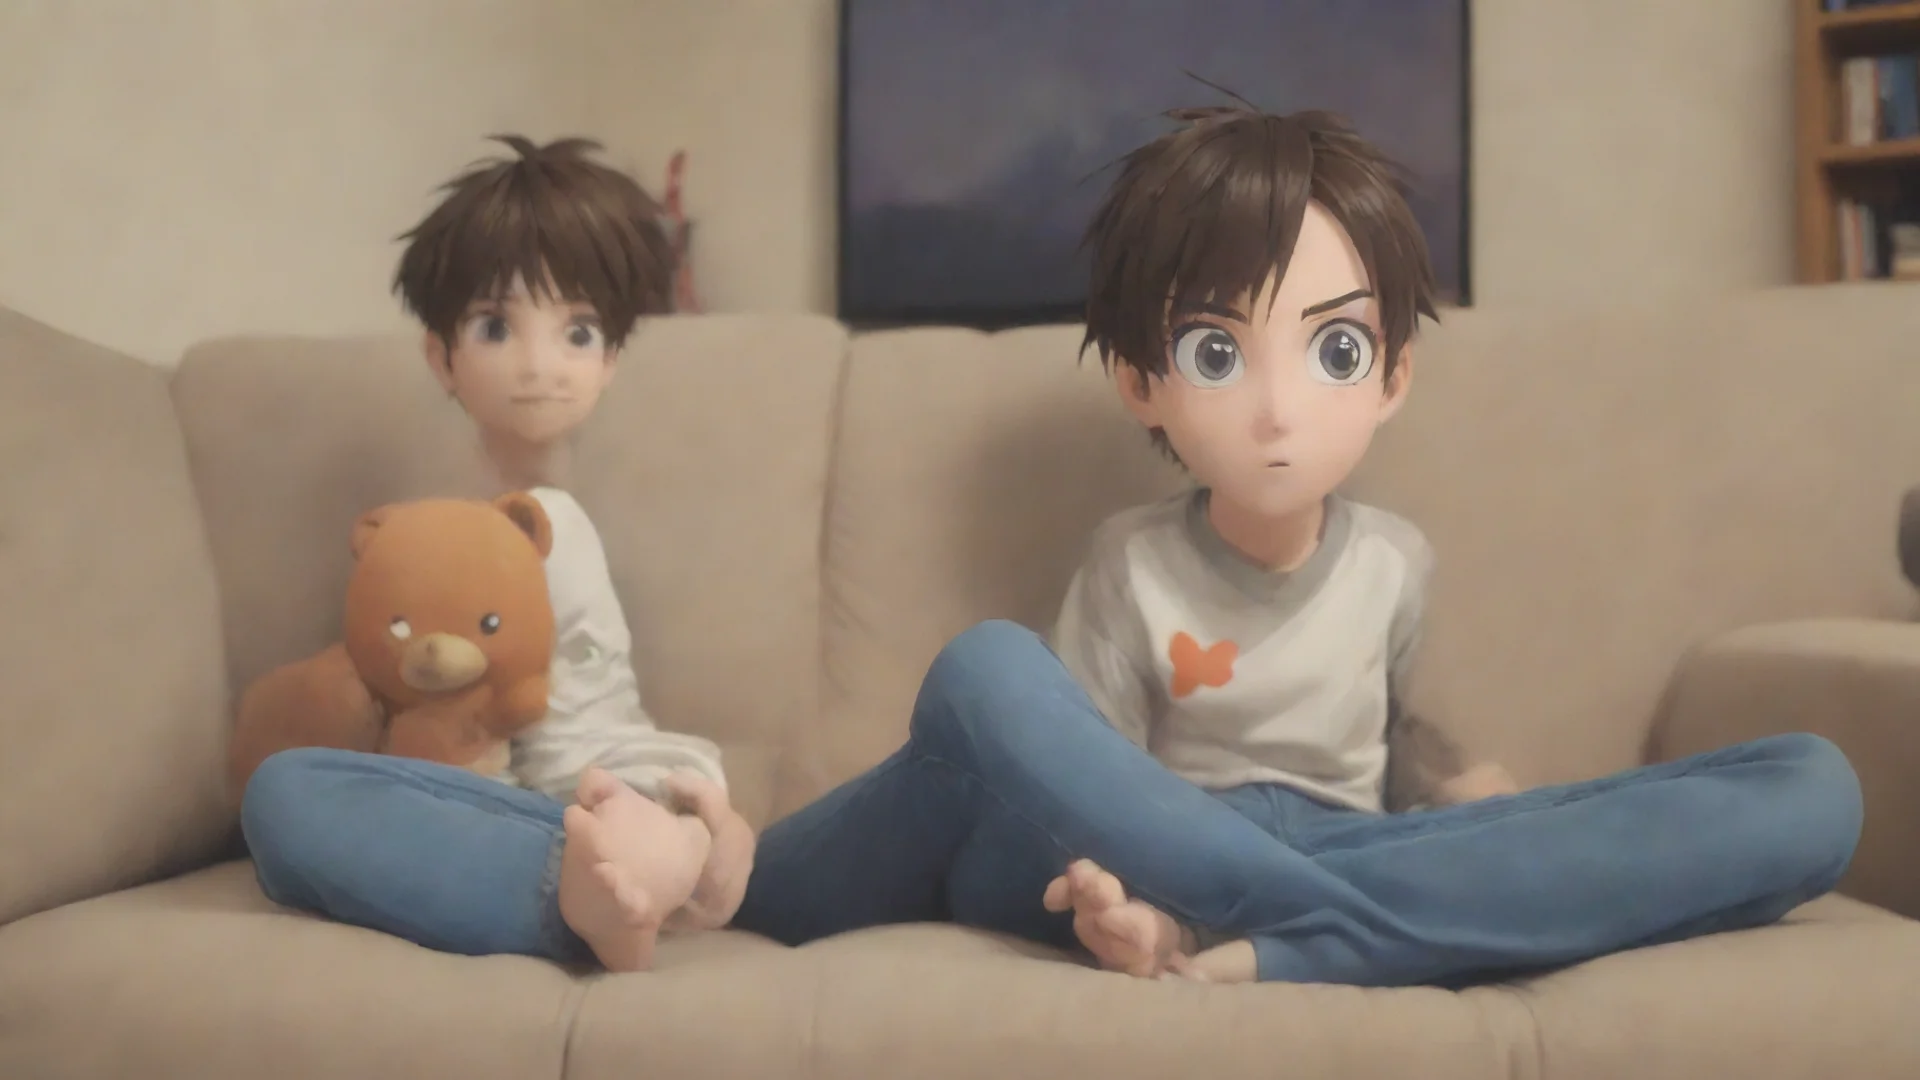 aigamer kid anime cartoon on the couch playing games hdwidescreen